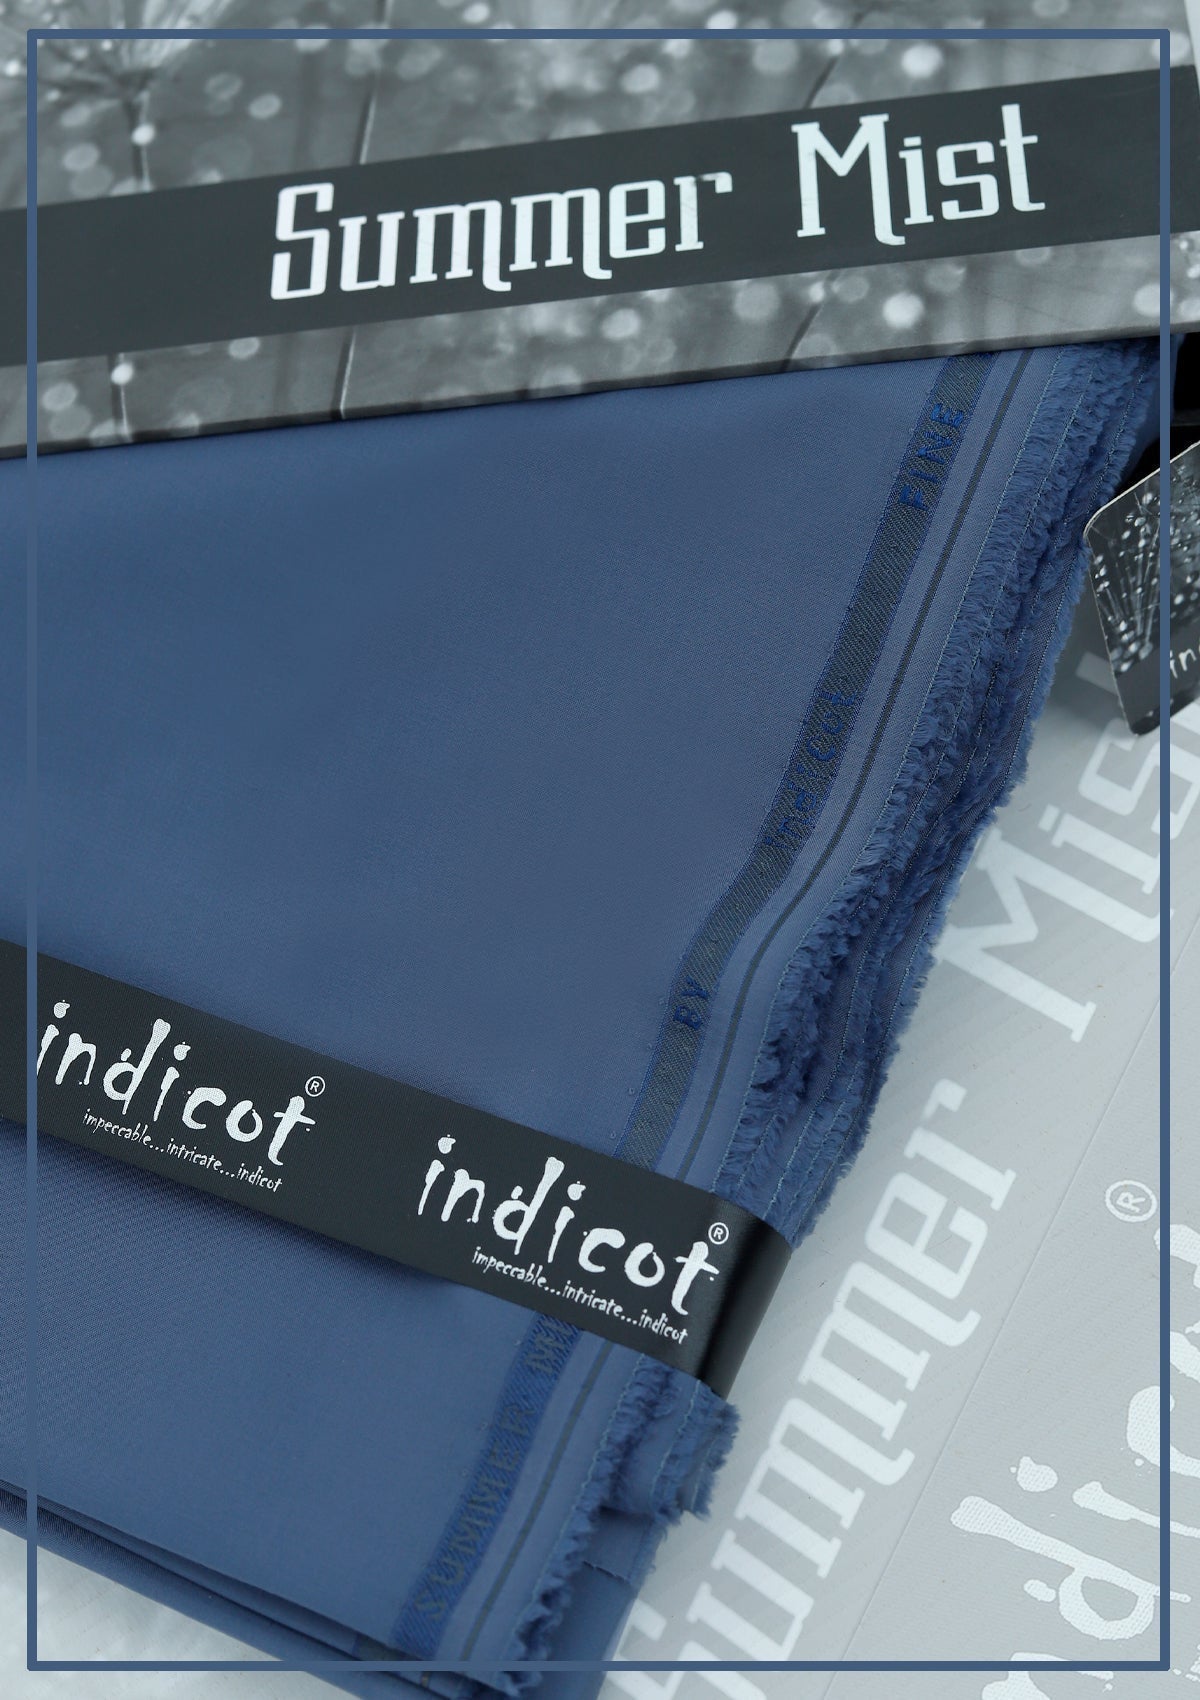 Indicot Summer Mist S#822 (S Blue) available at Saleem Fabrics Traditions